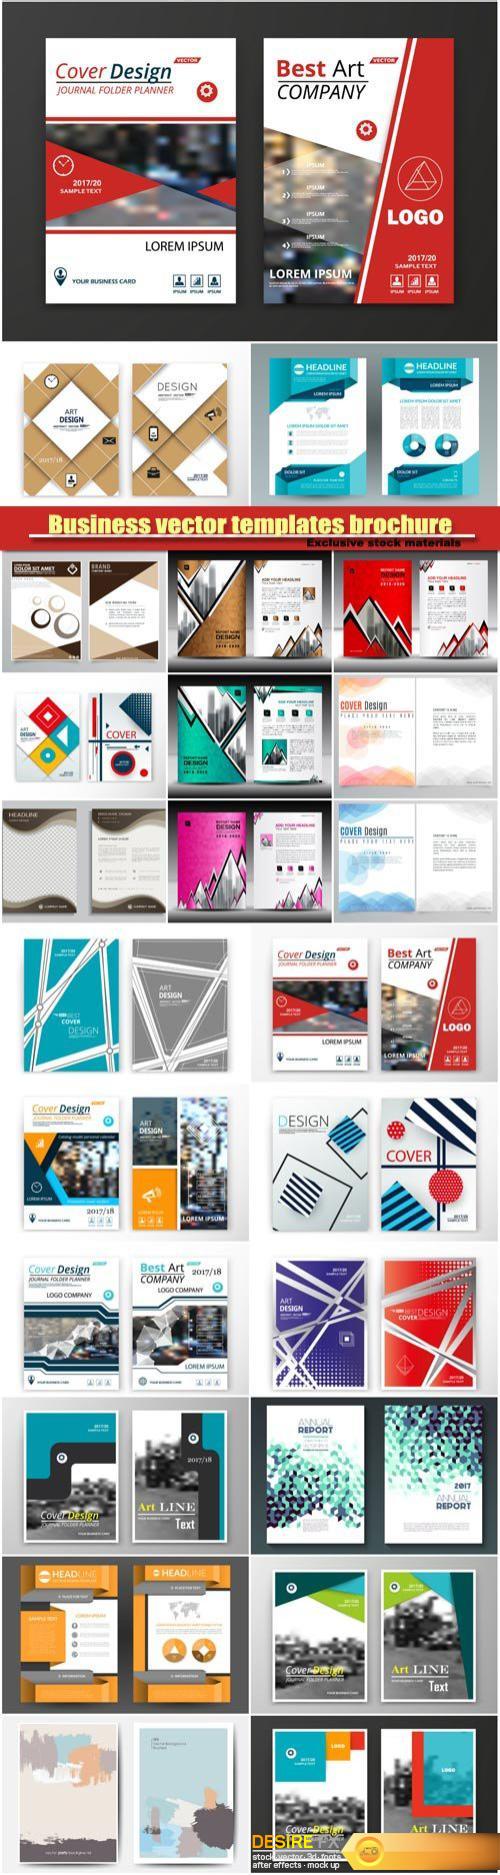 Business vector flyer templates brochure, colored cover image texture